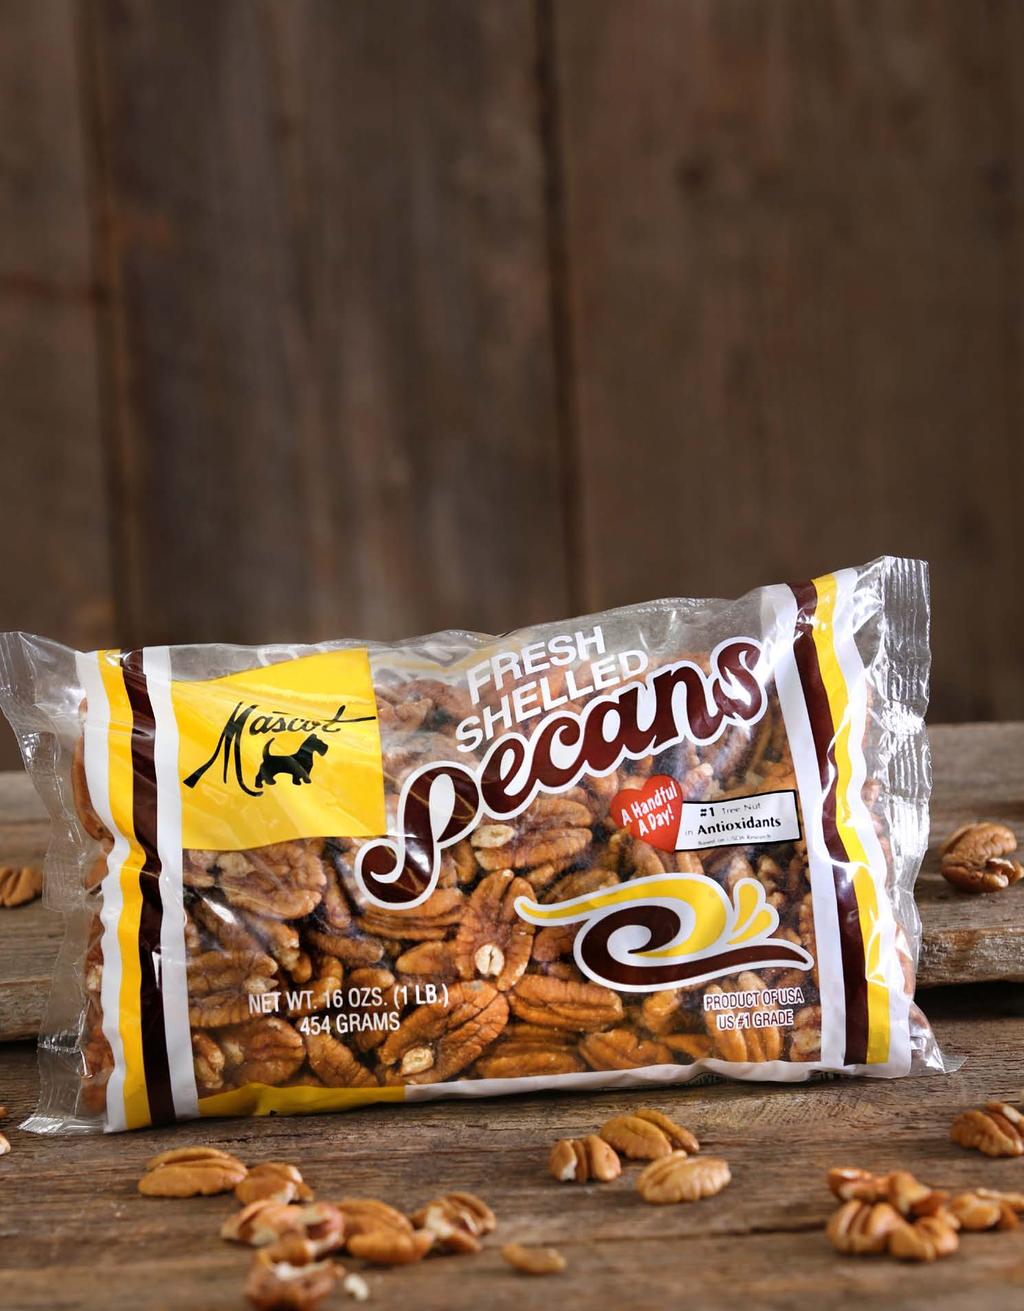 Pounds of Pecans If your taste buds are crying for pecans, Mascot